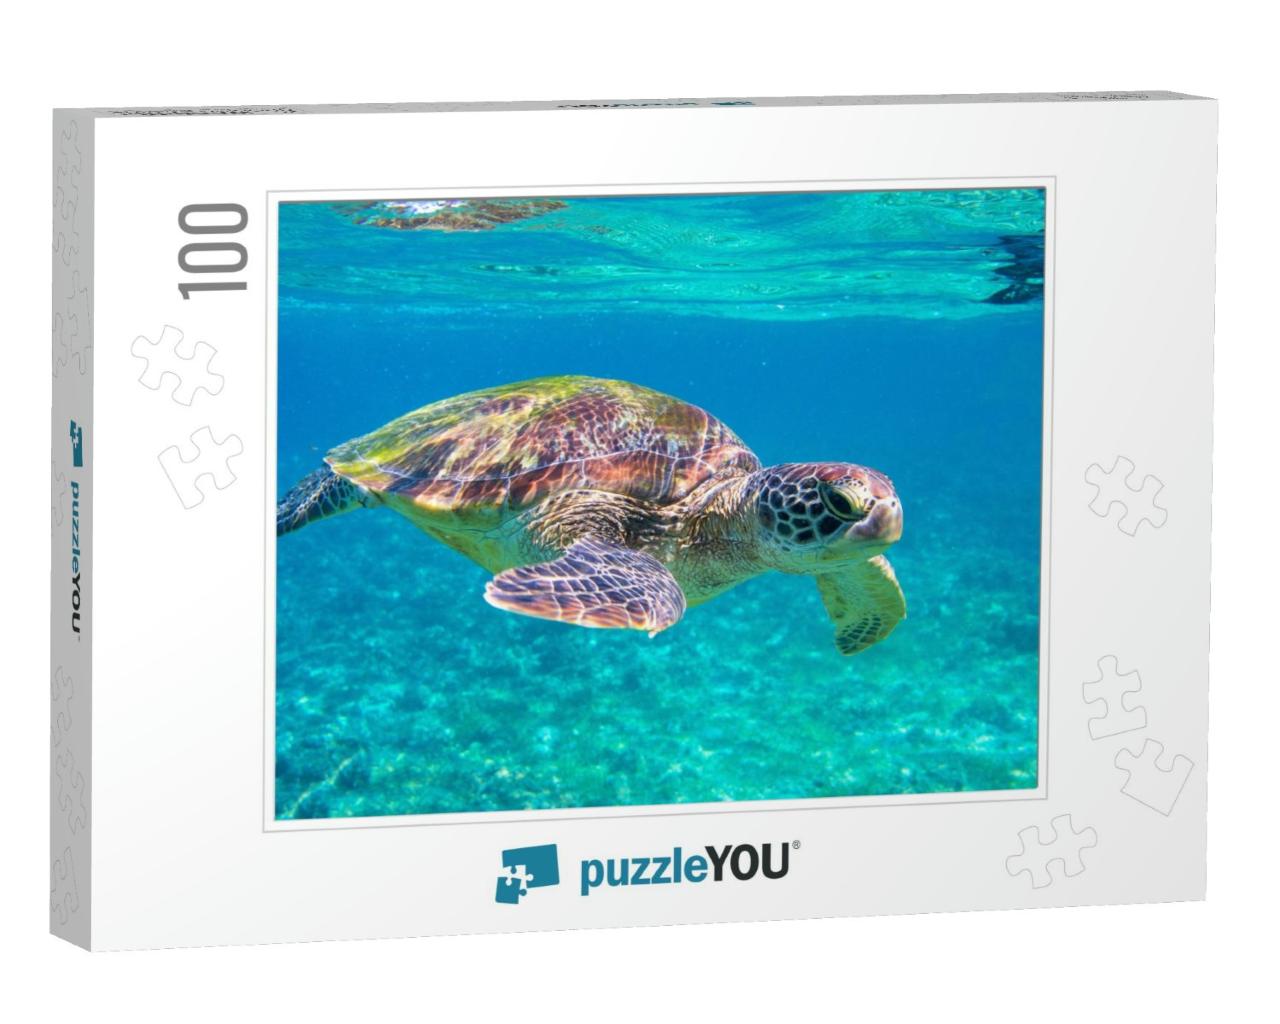 Cute Sea Turtle in Blue Water of Tropical Sea. Green Turt... Jigsaw Puzzle with 100 pieces